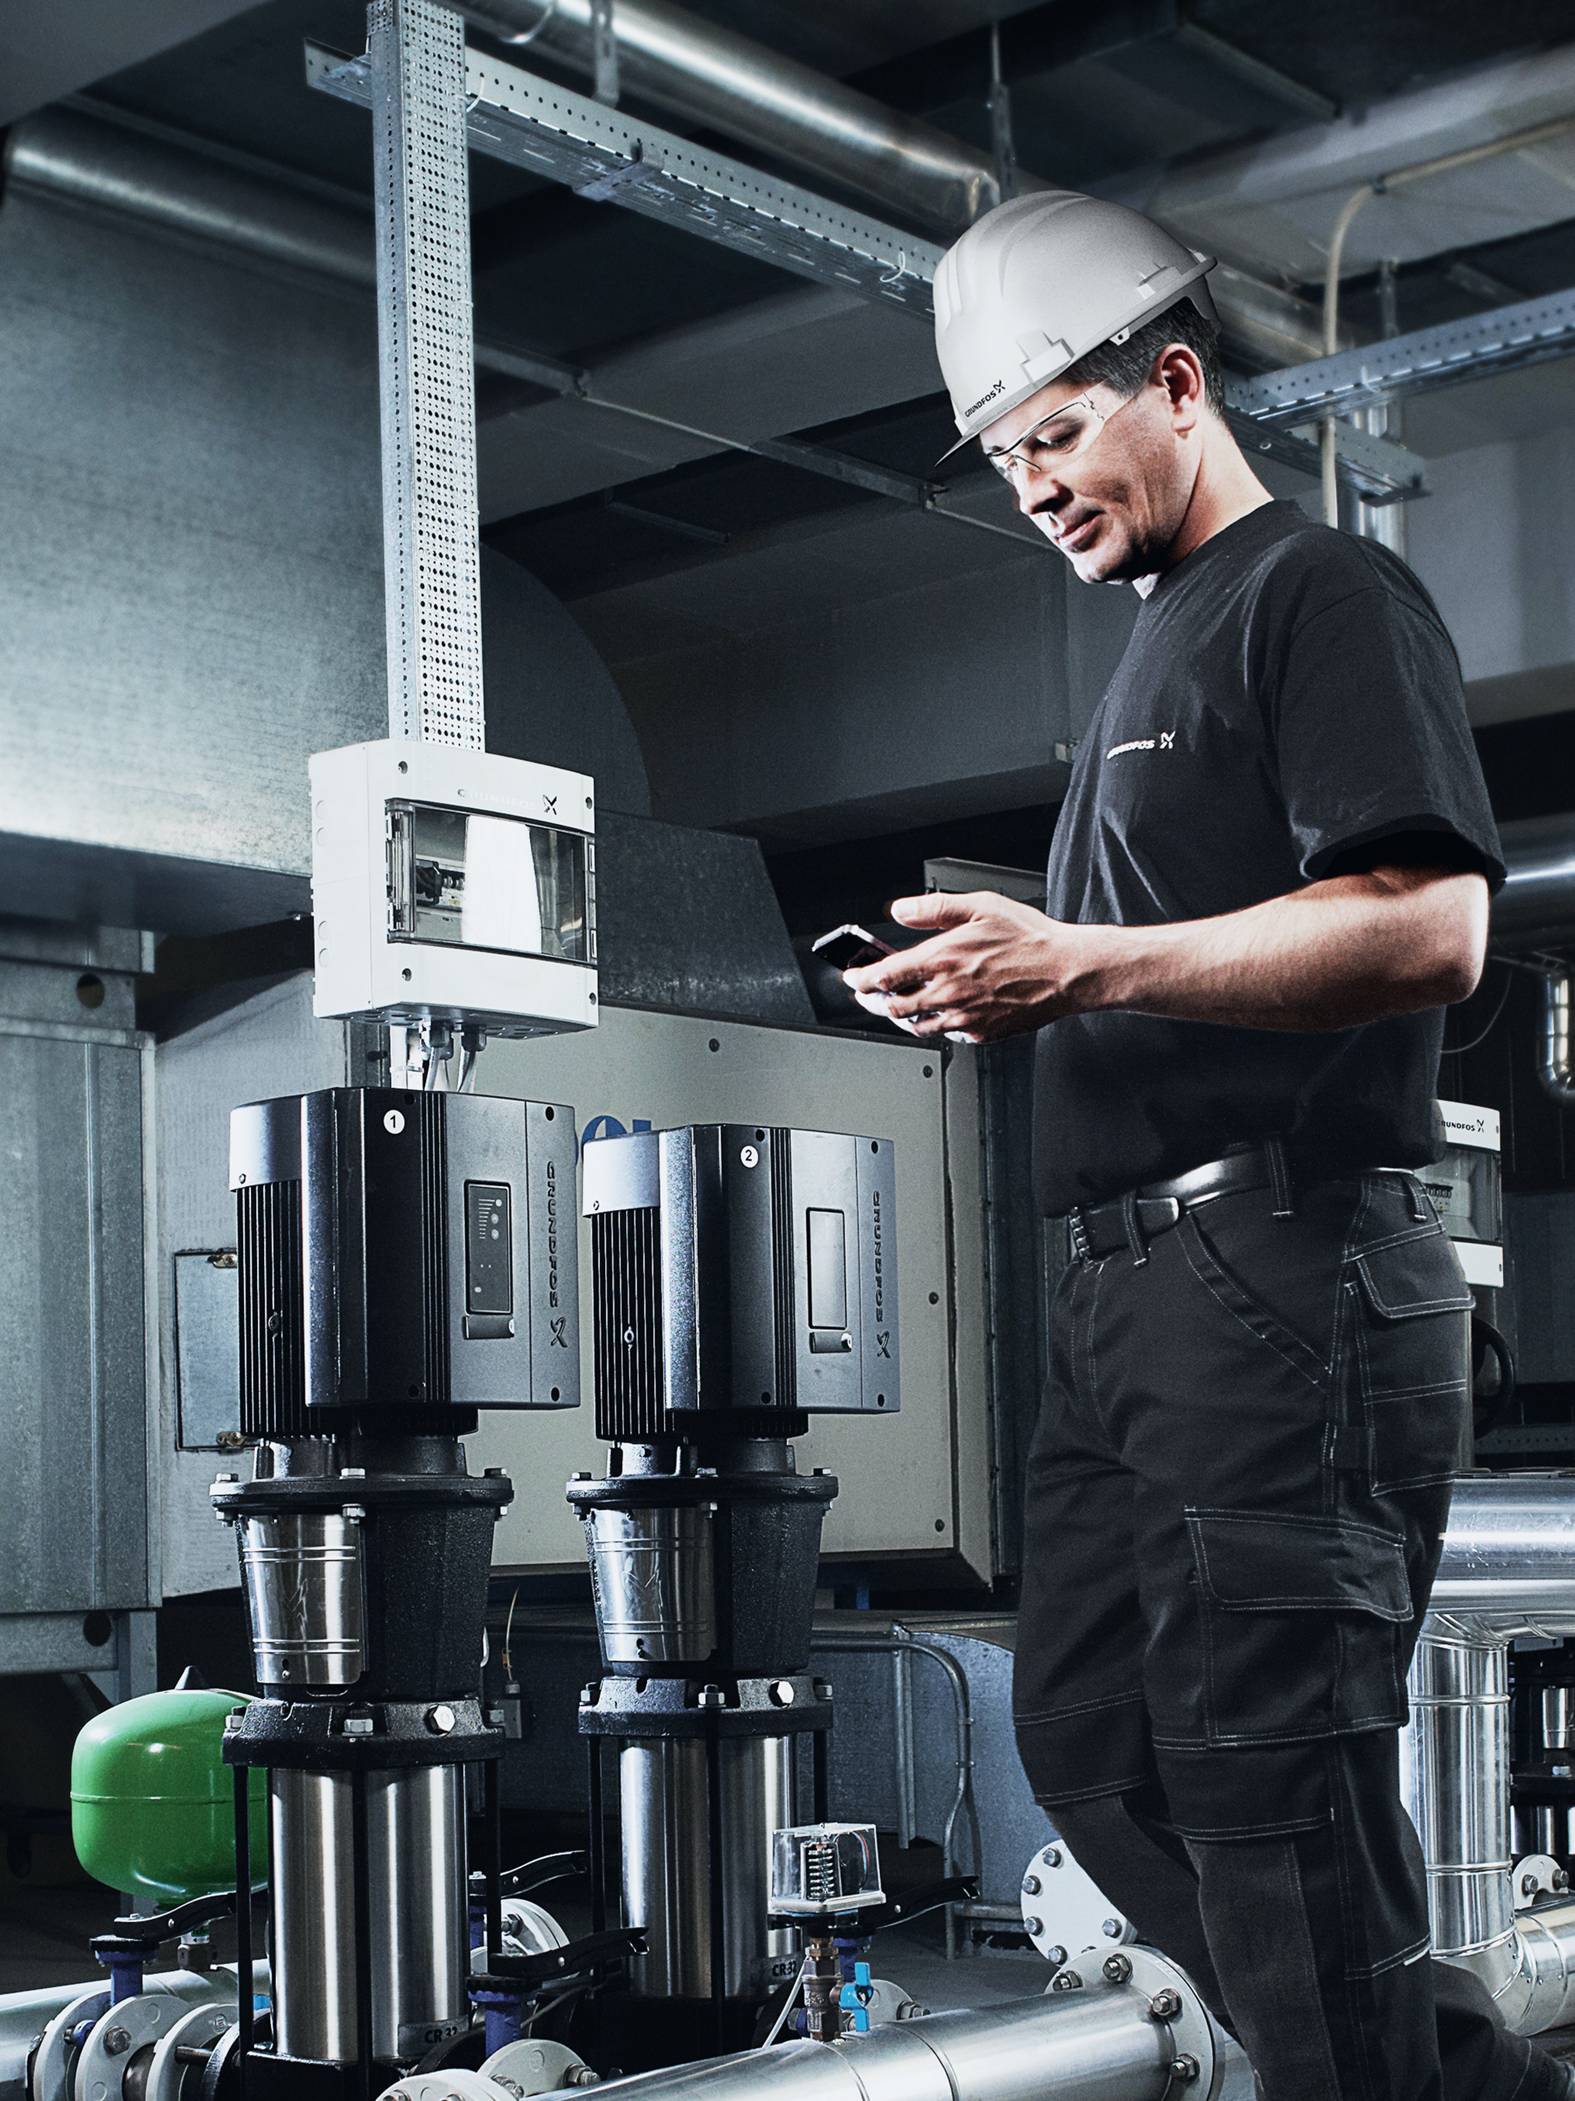 Grundfos United Kingdom | The full range supplier pumps and pump solutions. As a renowned pump manufacturer, Grundfos delivers efficient, reliable, and sustainable solutions all over the globe. Step into our